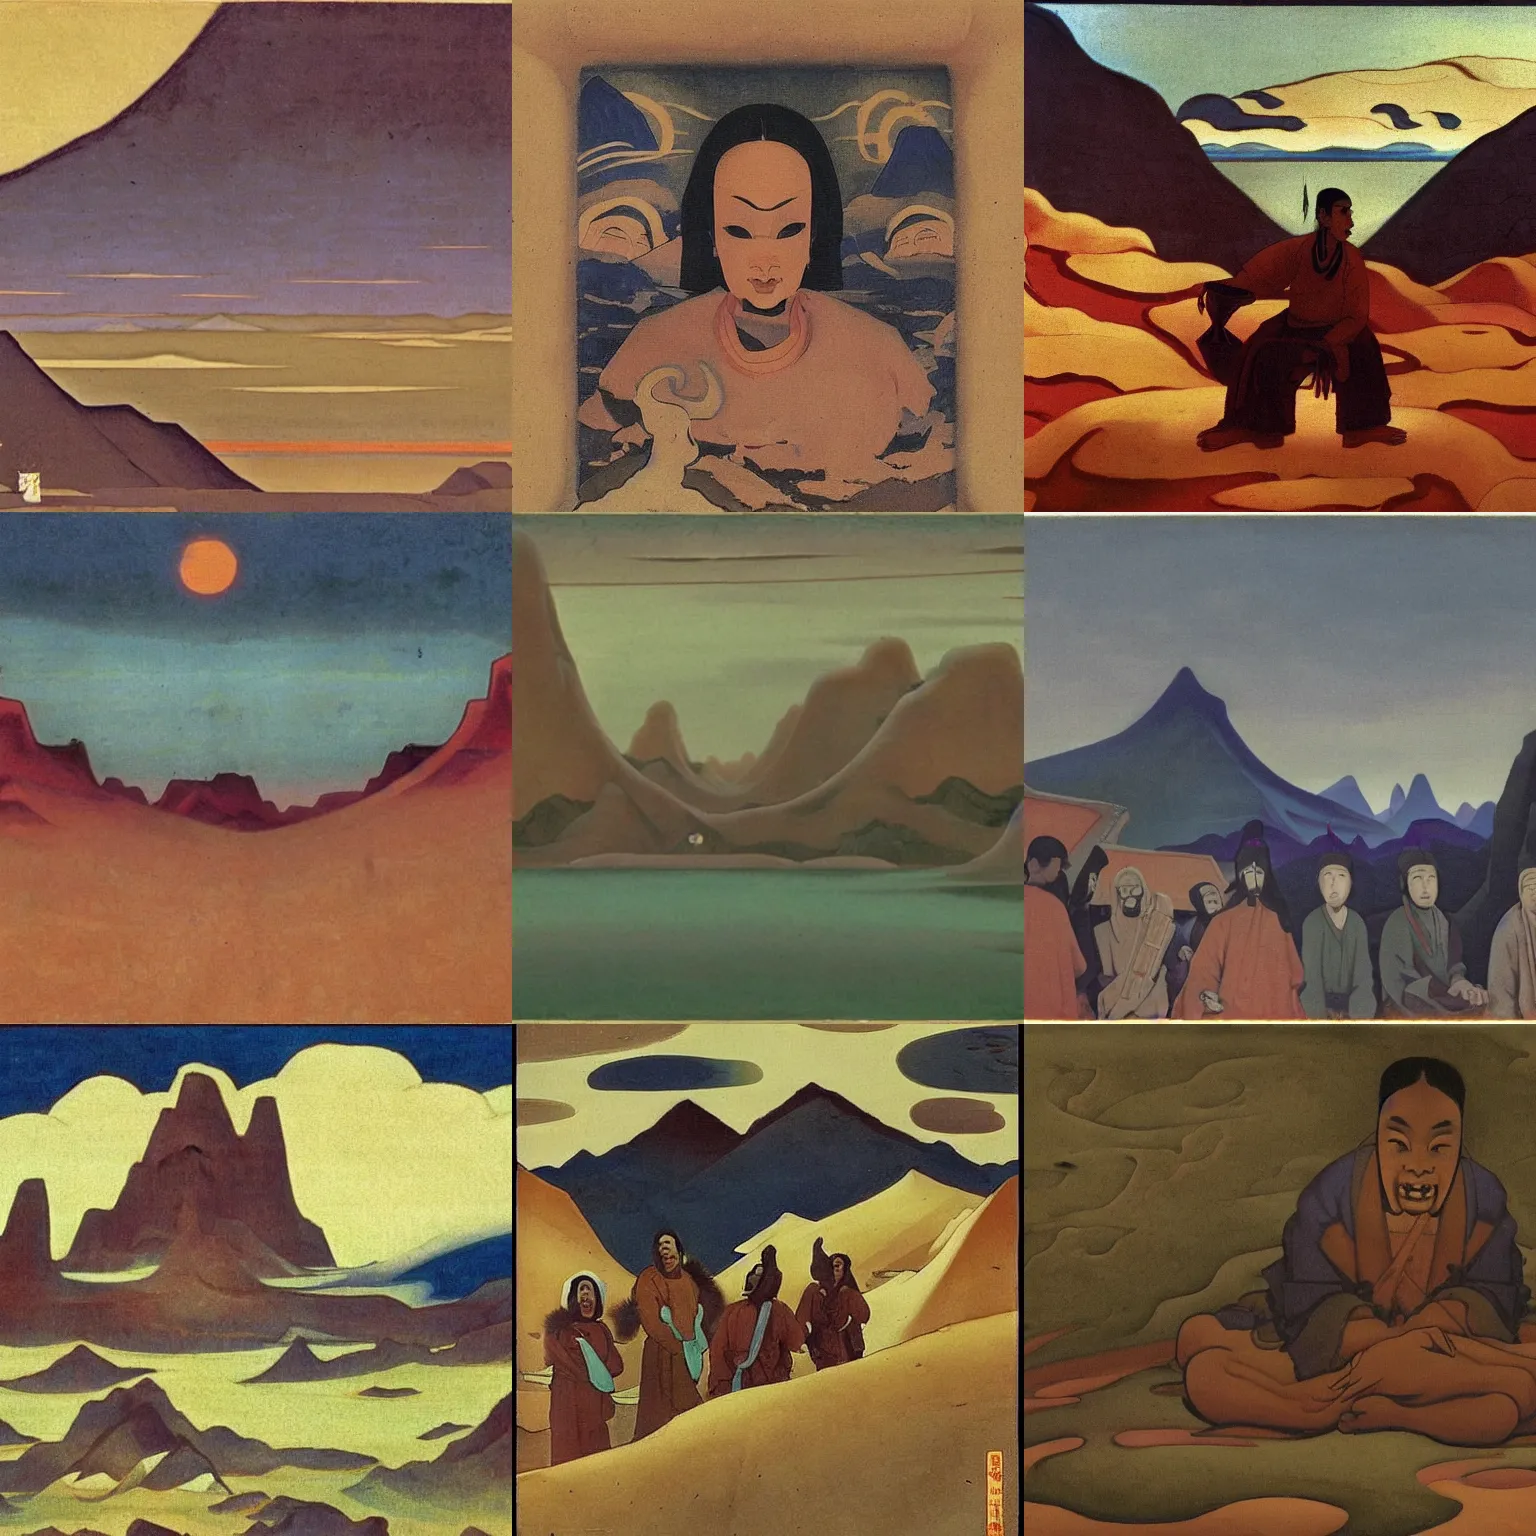 Prompt: Something about the scene reminded me of the strange and disturbing Asian paintings of Nicholas Roerich, and of the still stranger and more disturbing descriptions of the evilly fabled plateau of Leng which occur in the dreaded Necronomicon of the mad Arab Abdul Alhazred